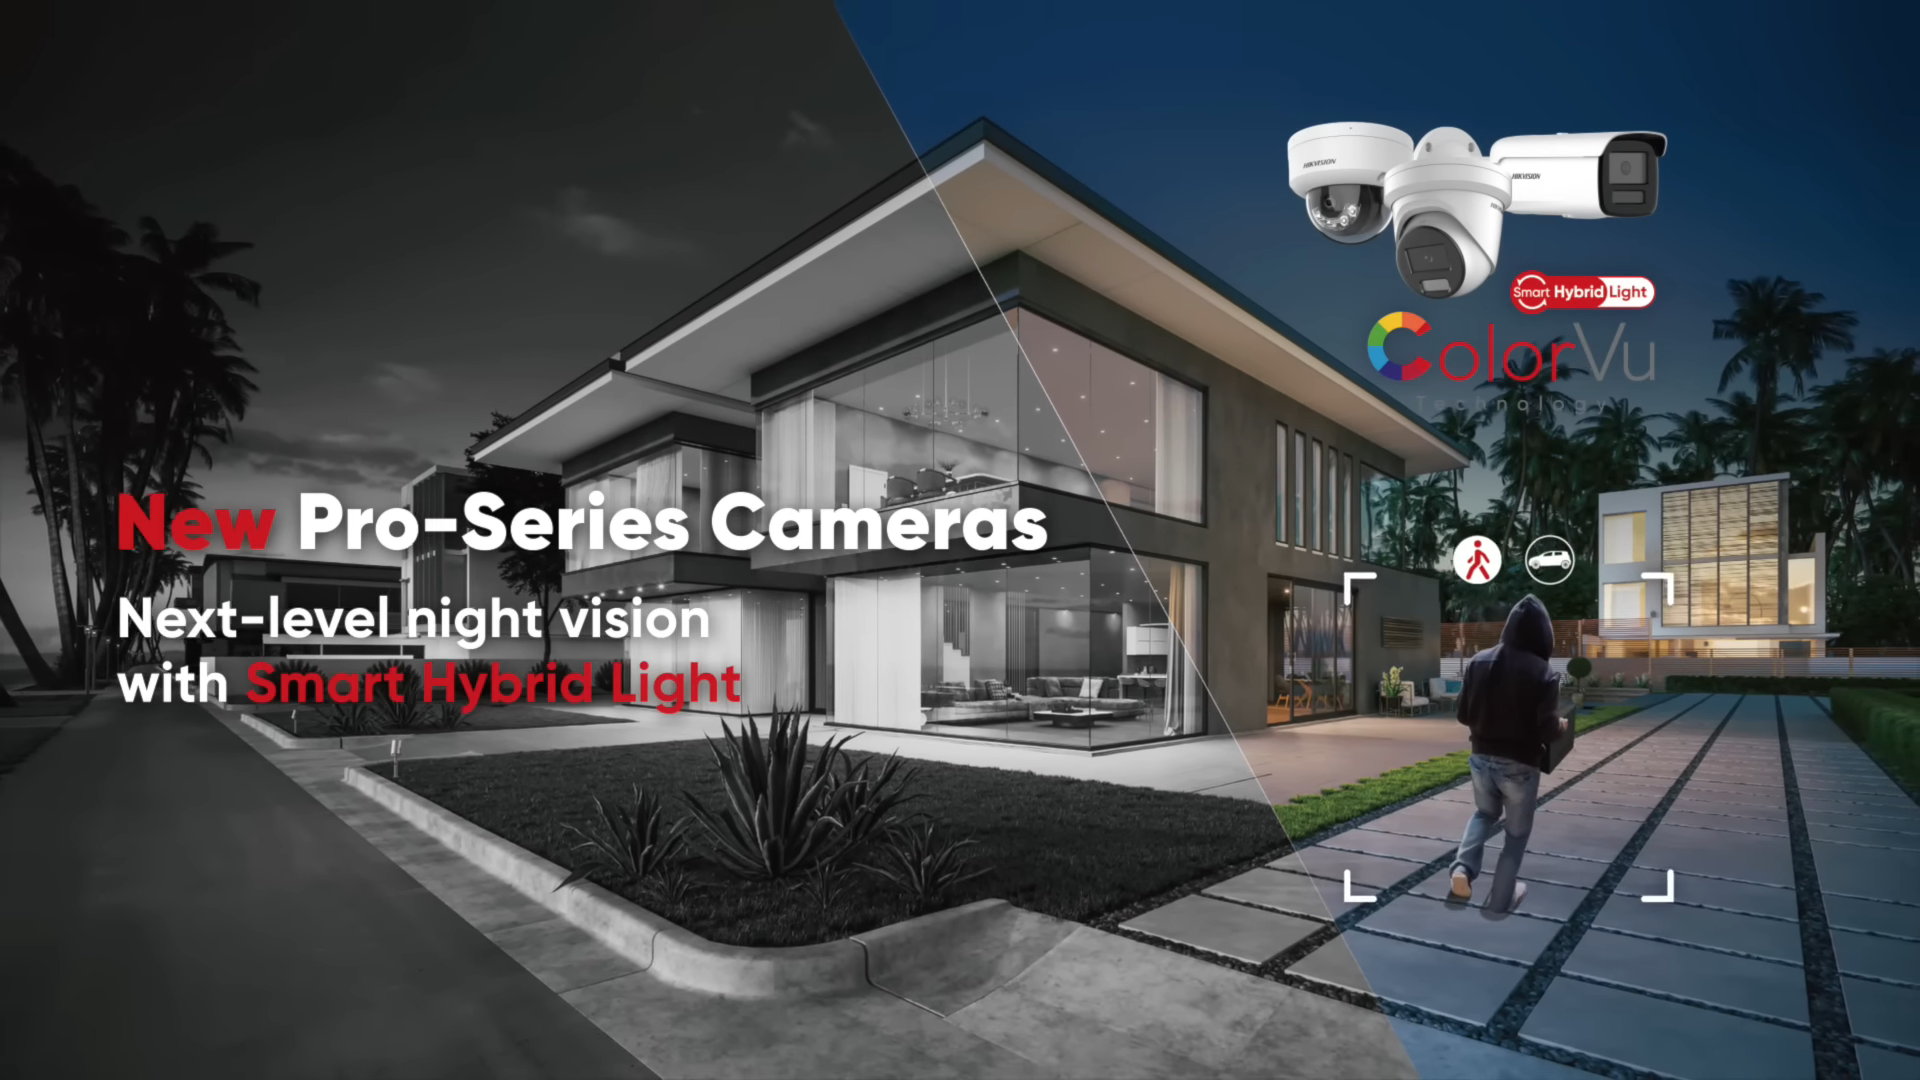 Load video: Introducing the Hikvision’s Smart Hybrid Light Camera with ColorVu, the excellent solution for low-light imaging. This innovative camera is equipped with advanced technology that enhances visibility in challenging lighting conditions. With three lighting modes available - IR light, white light, and smart mode - this camera can suit virtually any need.In this video, we’ll explore the features and benefits of this brand-new camera, discuss its advantages that surpass conventional cameras, and showcase real-world examples of its impressive performance. Upgrade your security system today with Hikvision’s Smart Hybrid Light Camera with ColorVu!